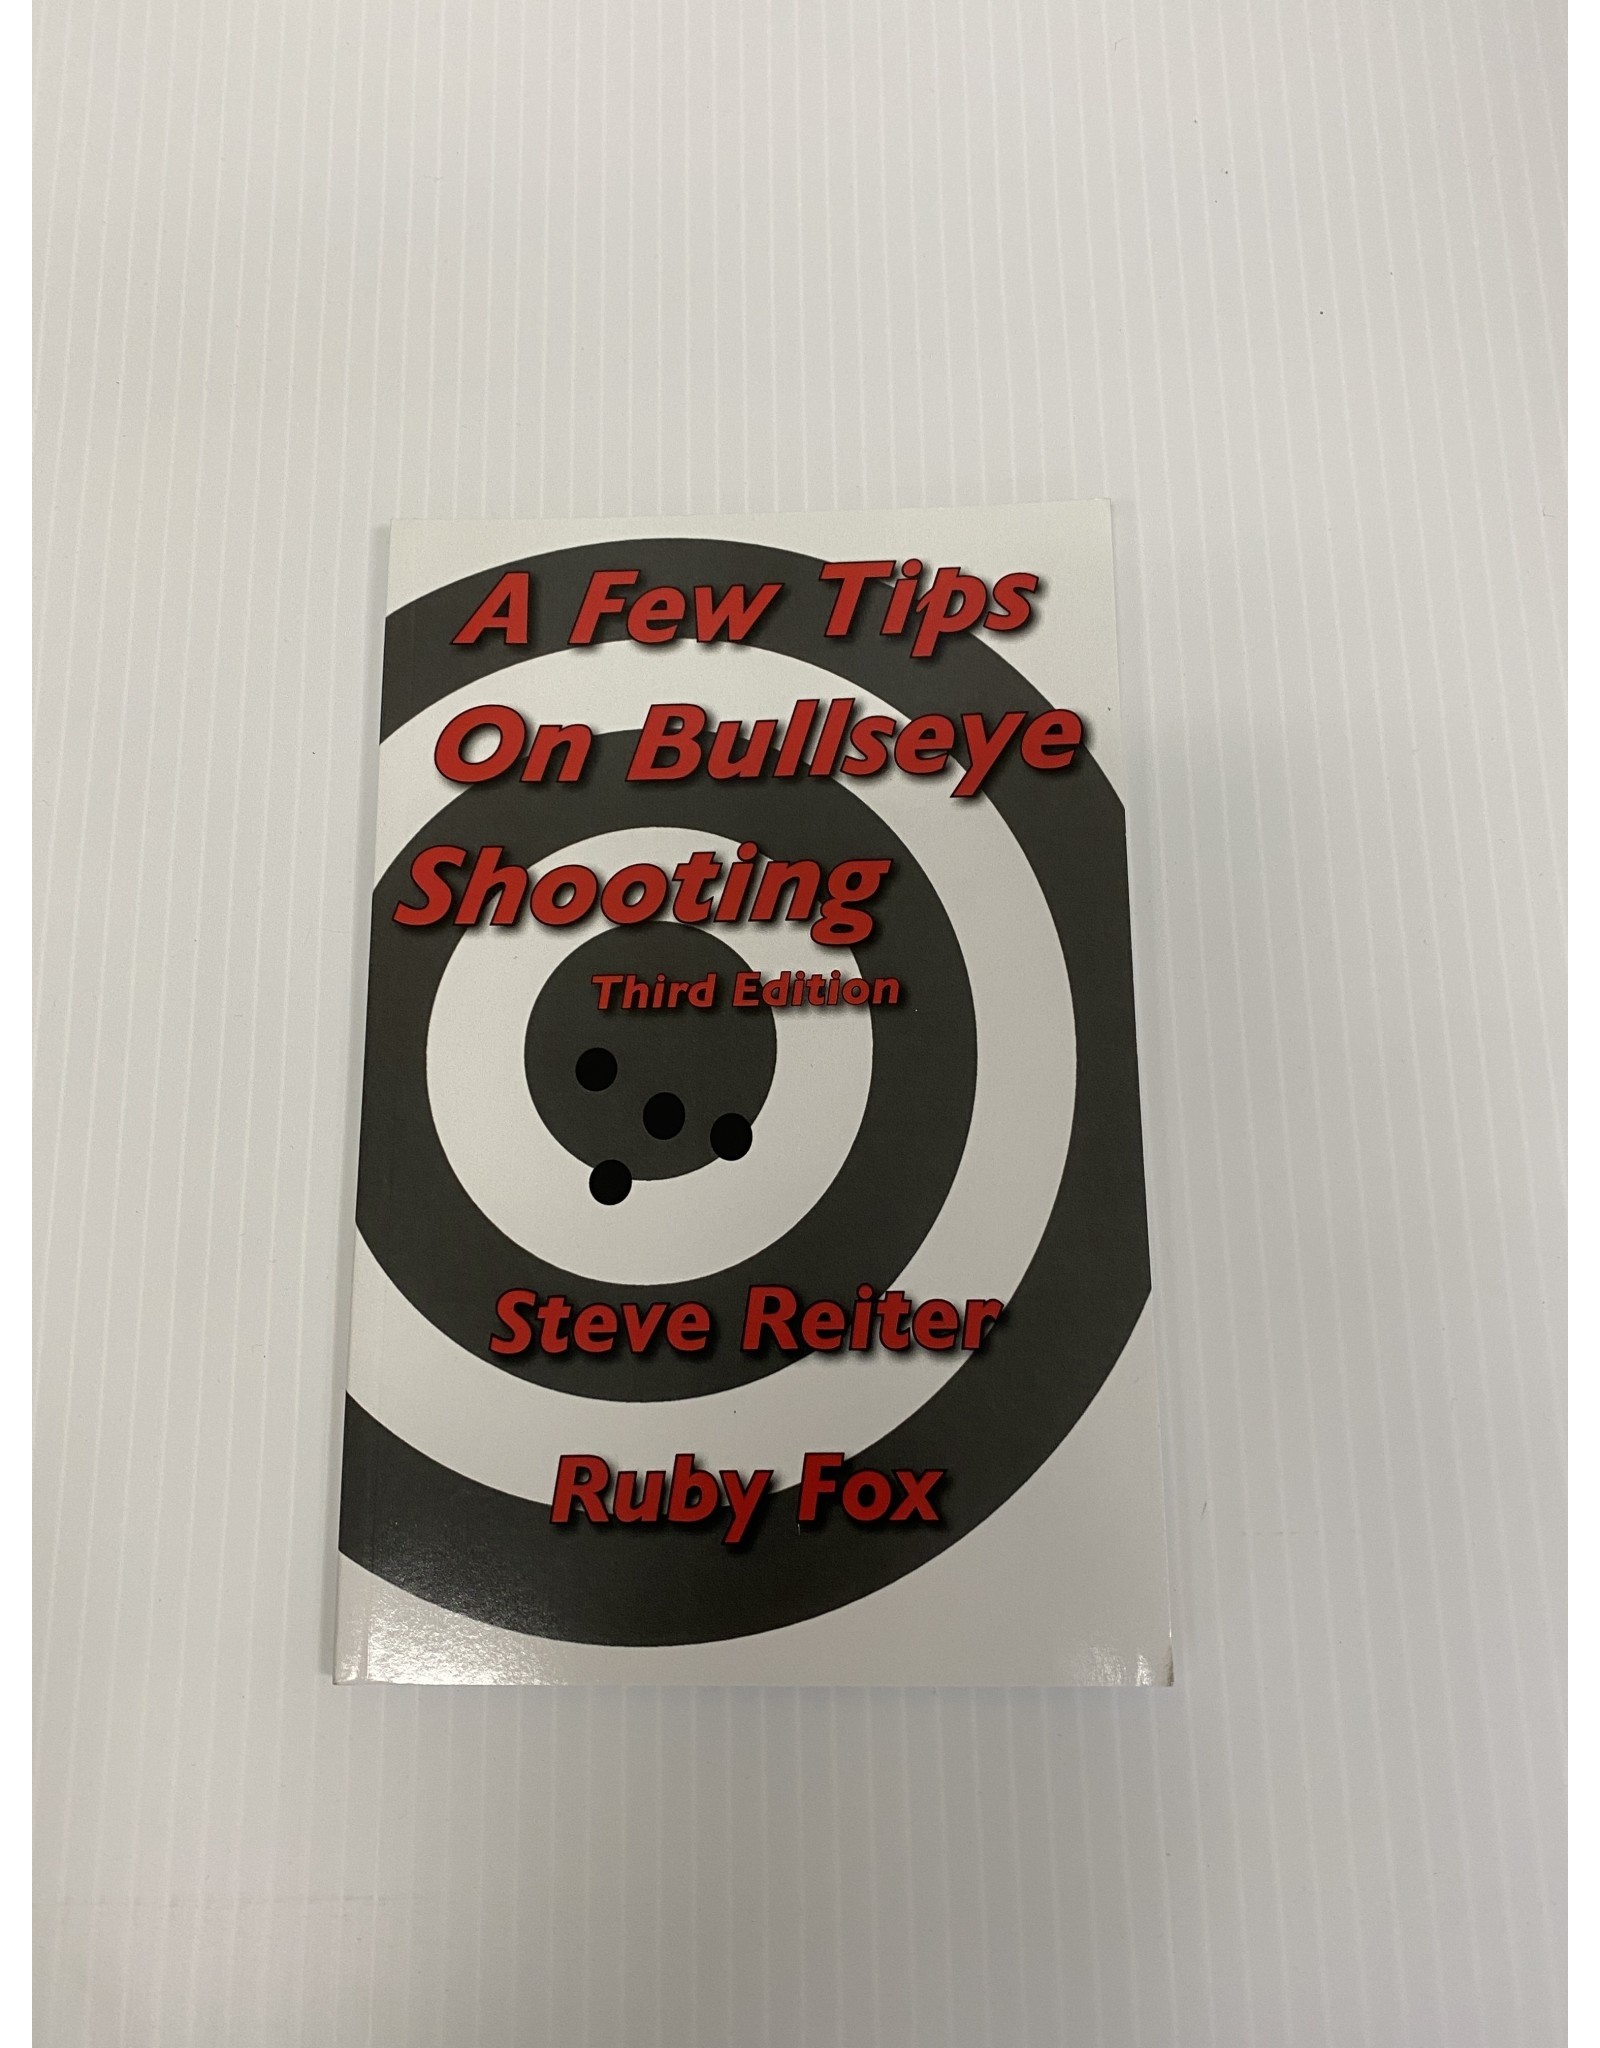 A Few Tips on Bullseye Shooting 3rd Edition by Steve Reiter and Ruby Fox Book